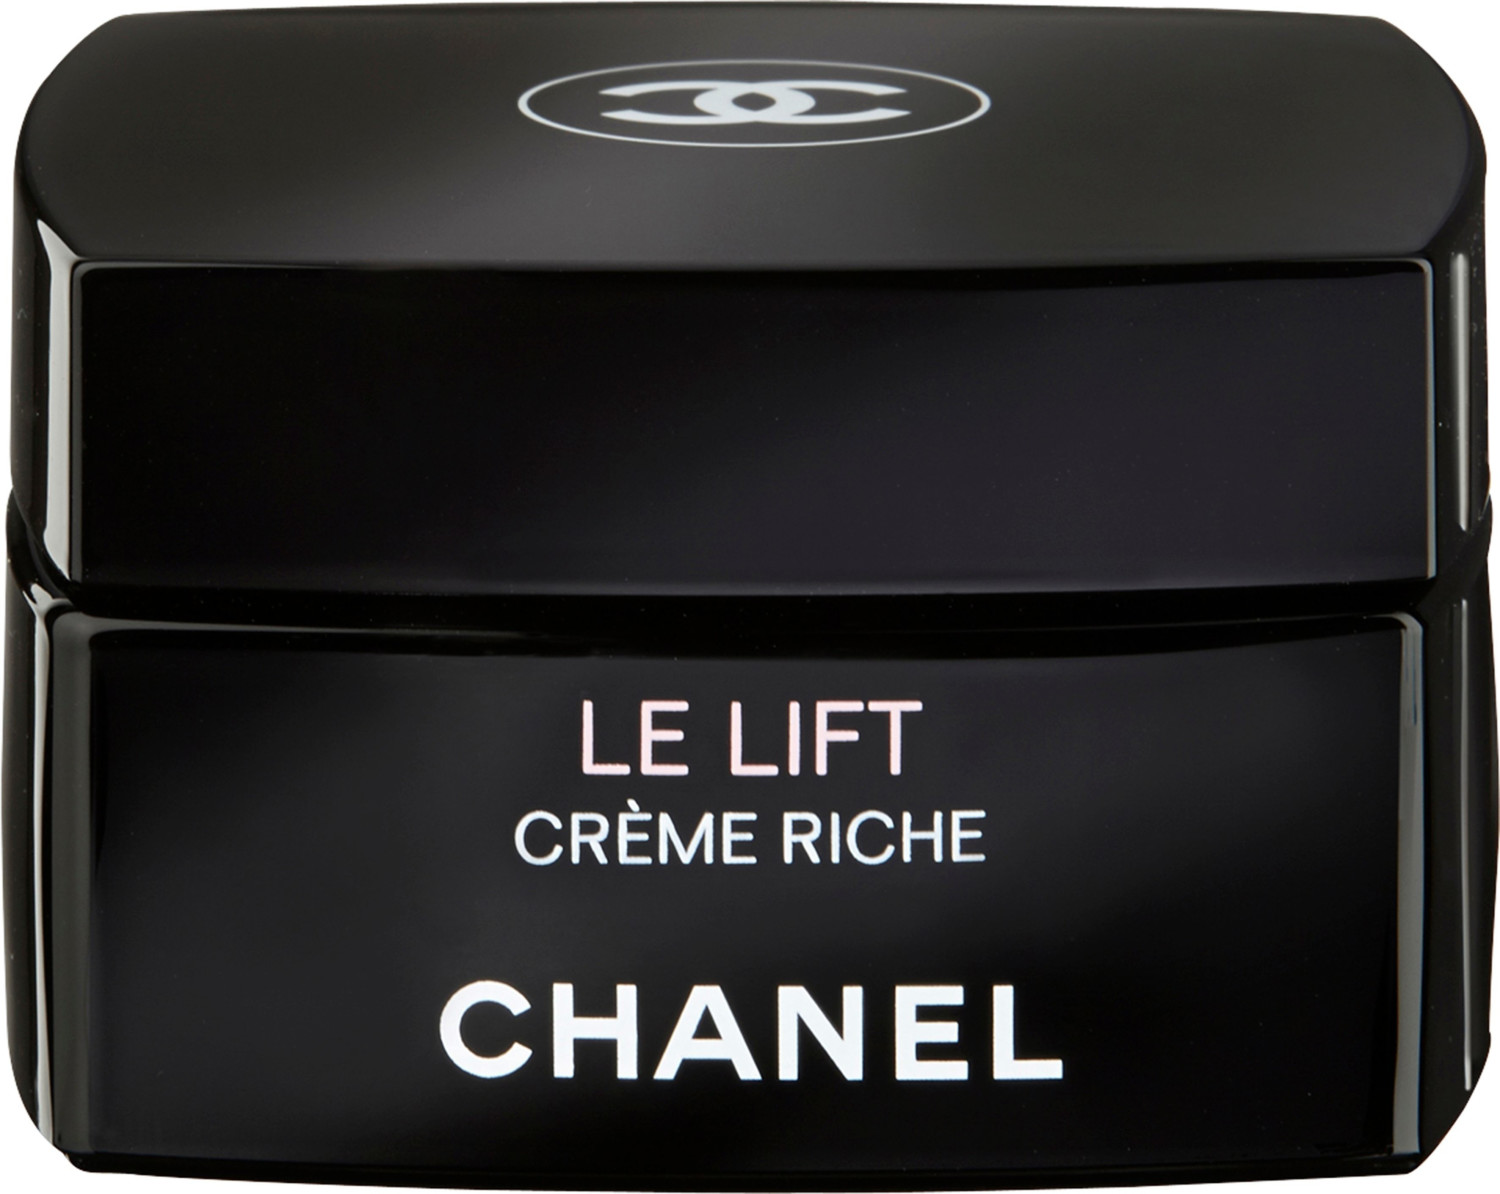 Buy Chanel Le Lift Firming Anti Wrinkle Crème Riche (50g) from £124.20  (Today) – Best Deals on